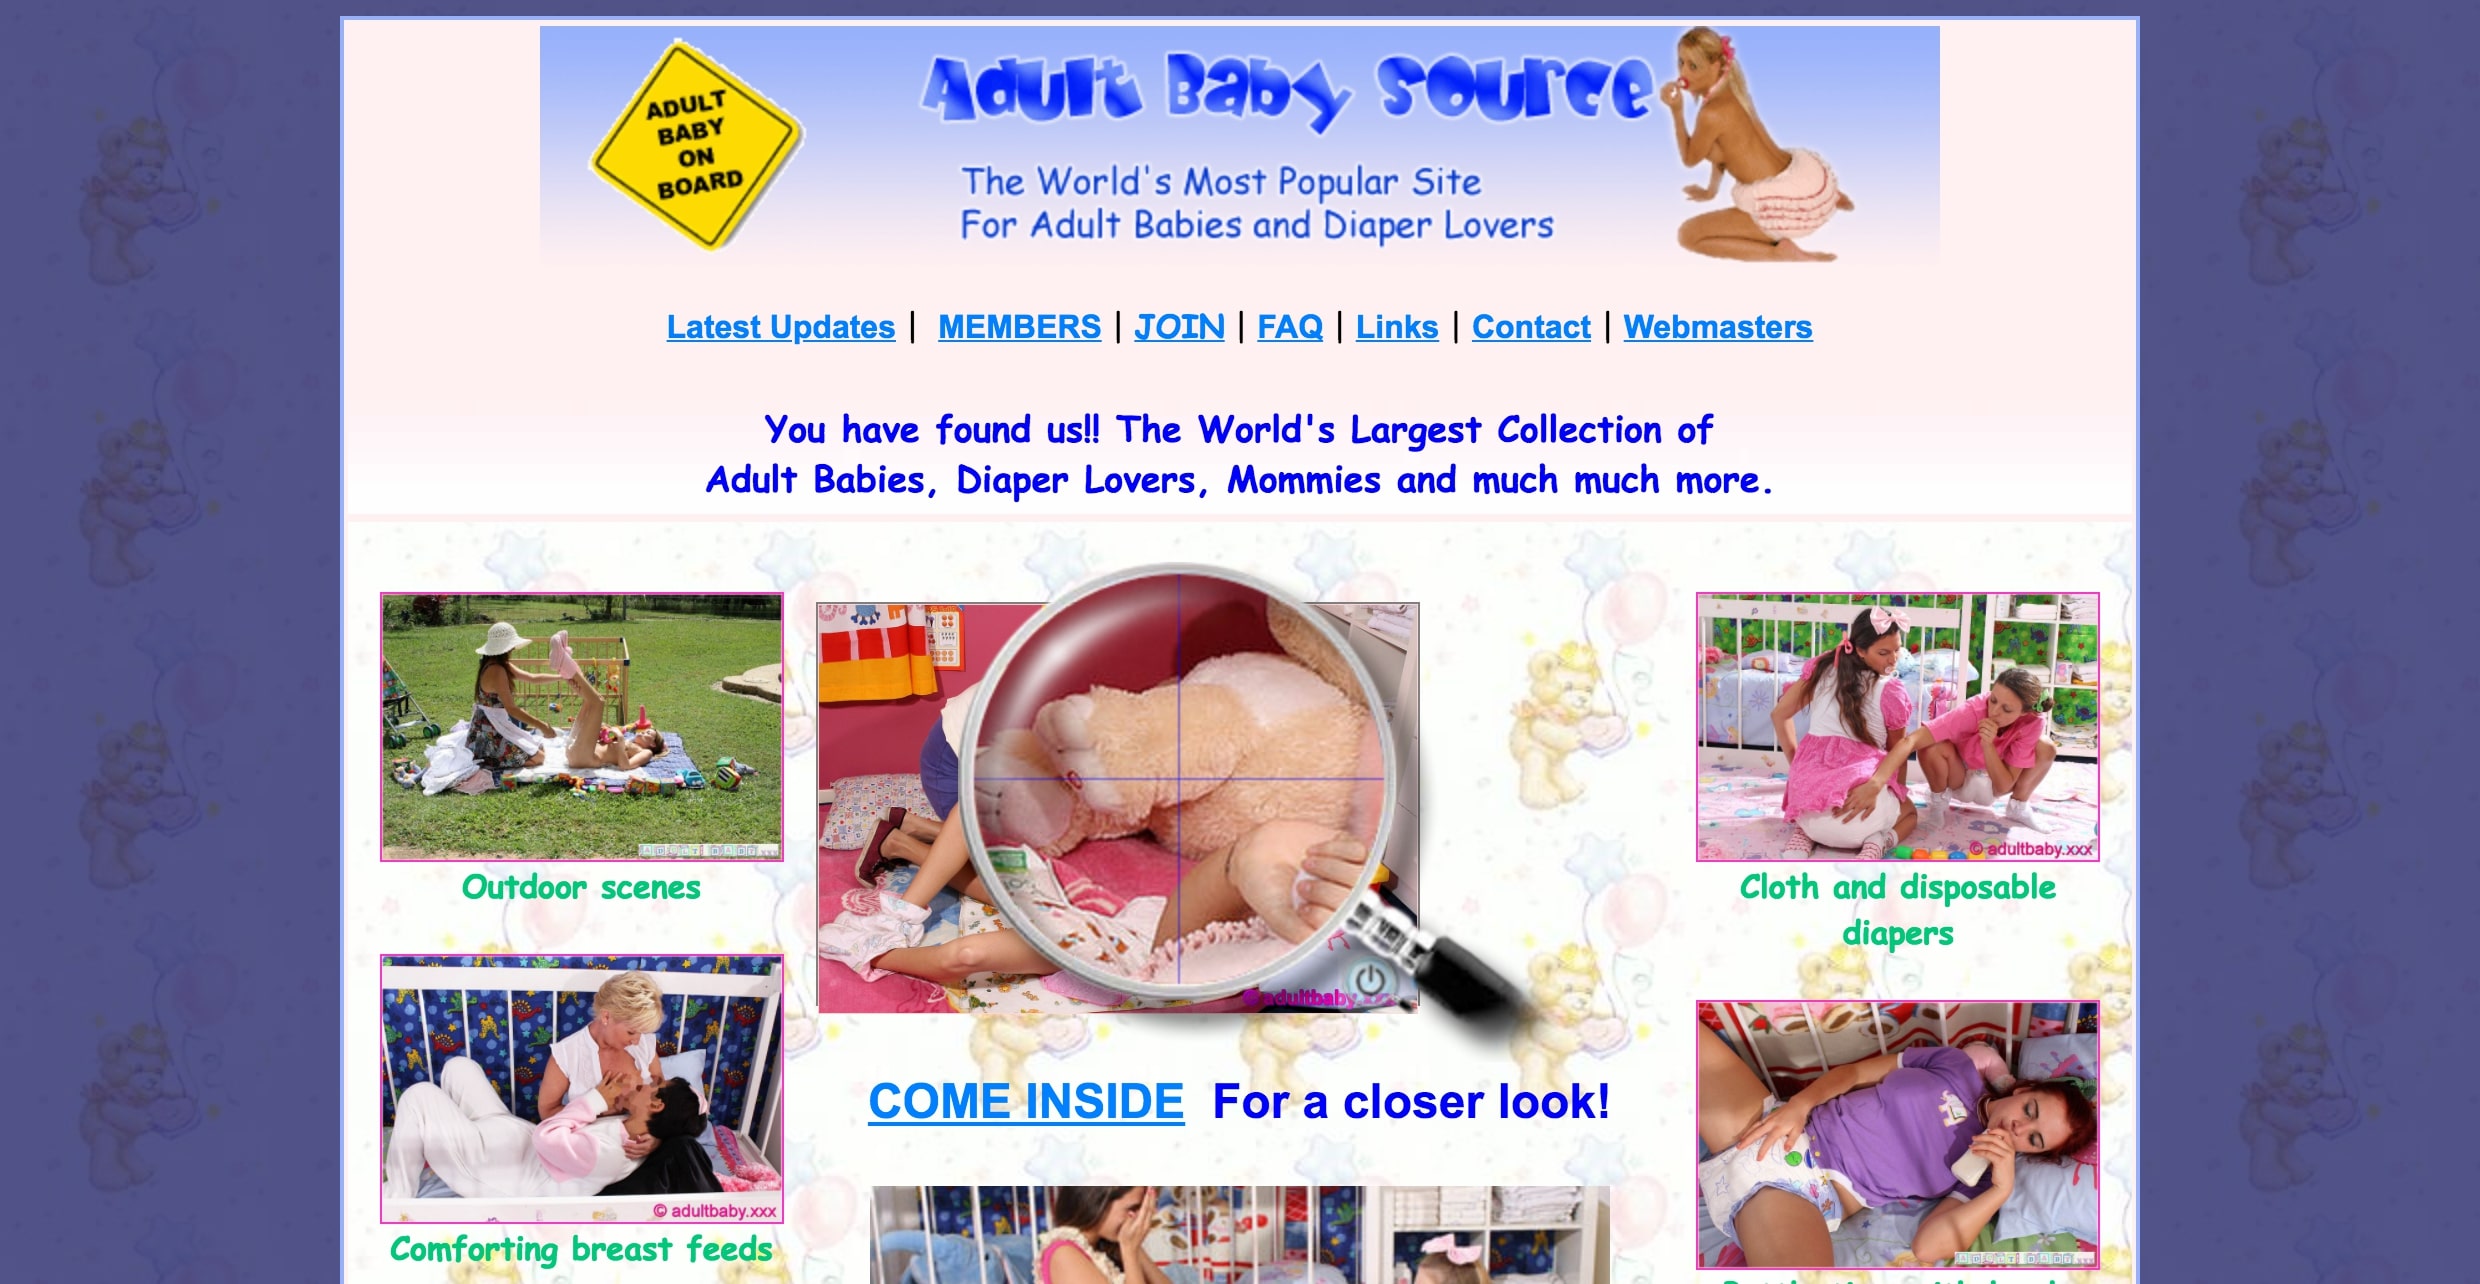 Adult Baby Source